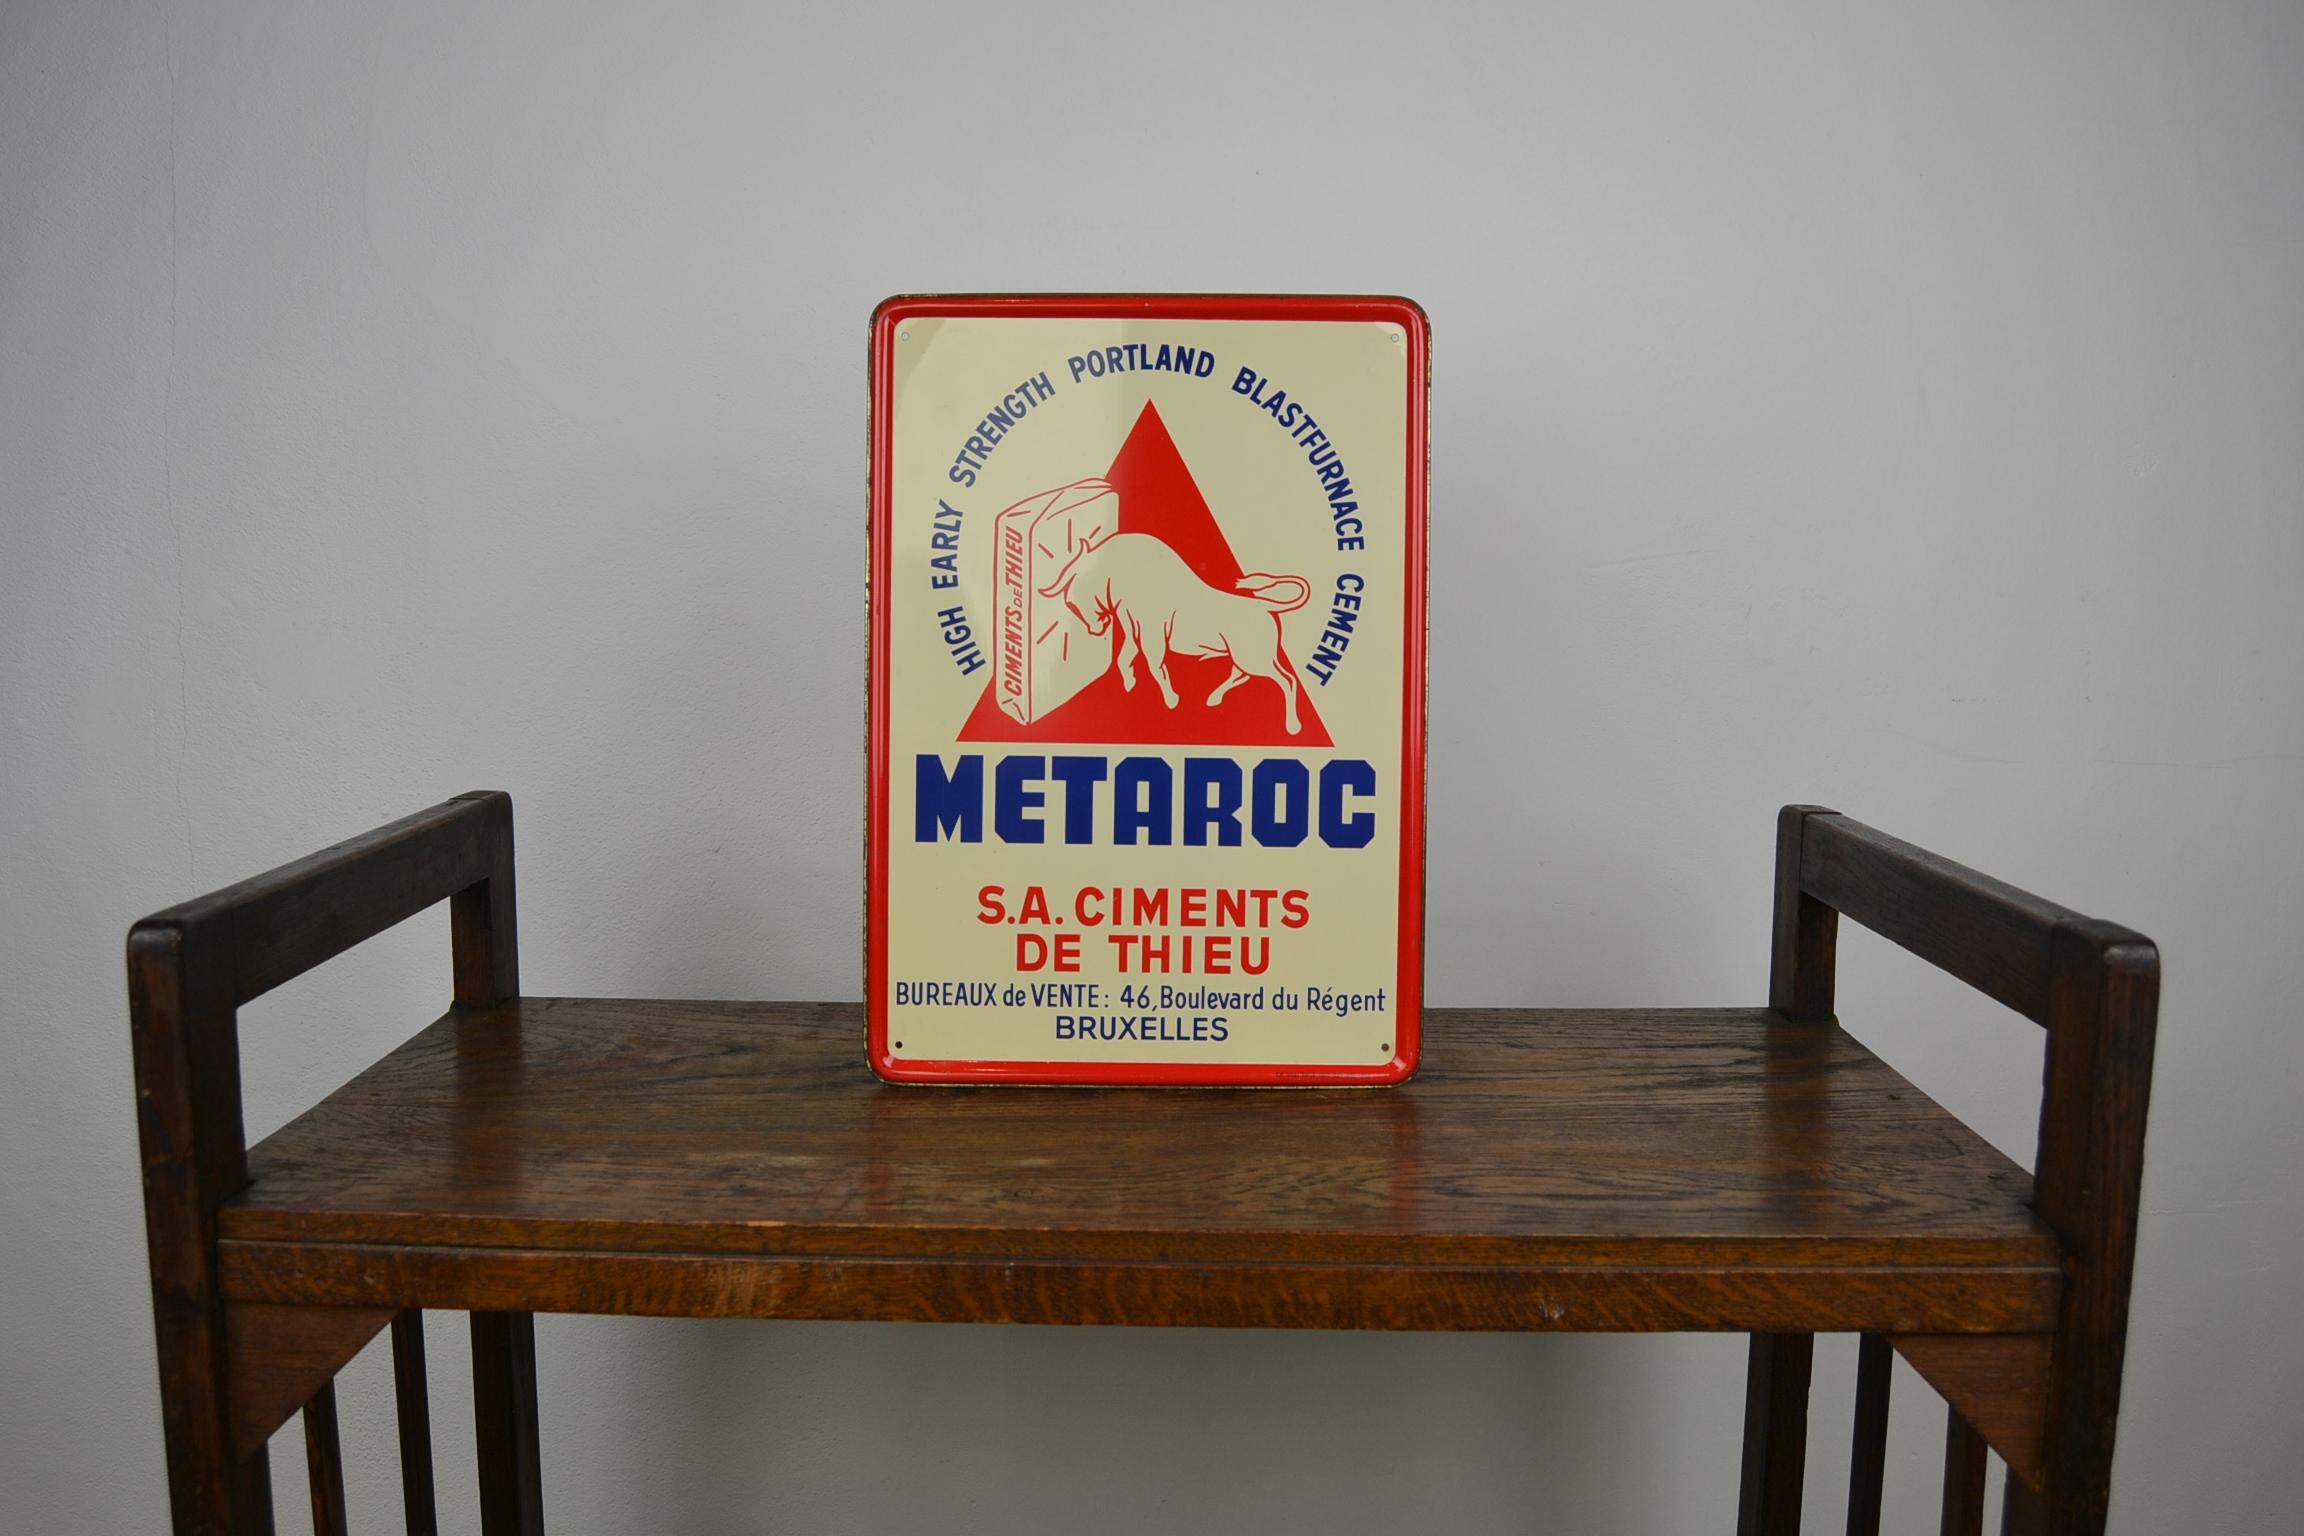 Advertising sign with a Bull for building materials. 
A Mid-20th century publicity sign, advertising sign
made for the company Metaroc Brussels, Belgium.
This company was known for his high early strength Portland Blasturance cement building